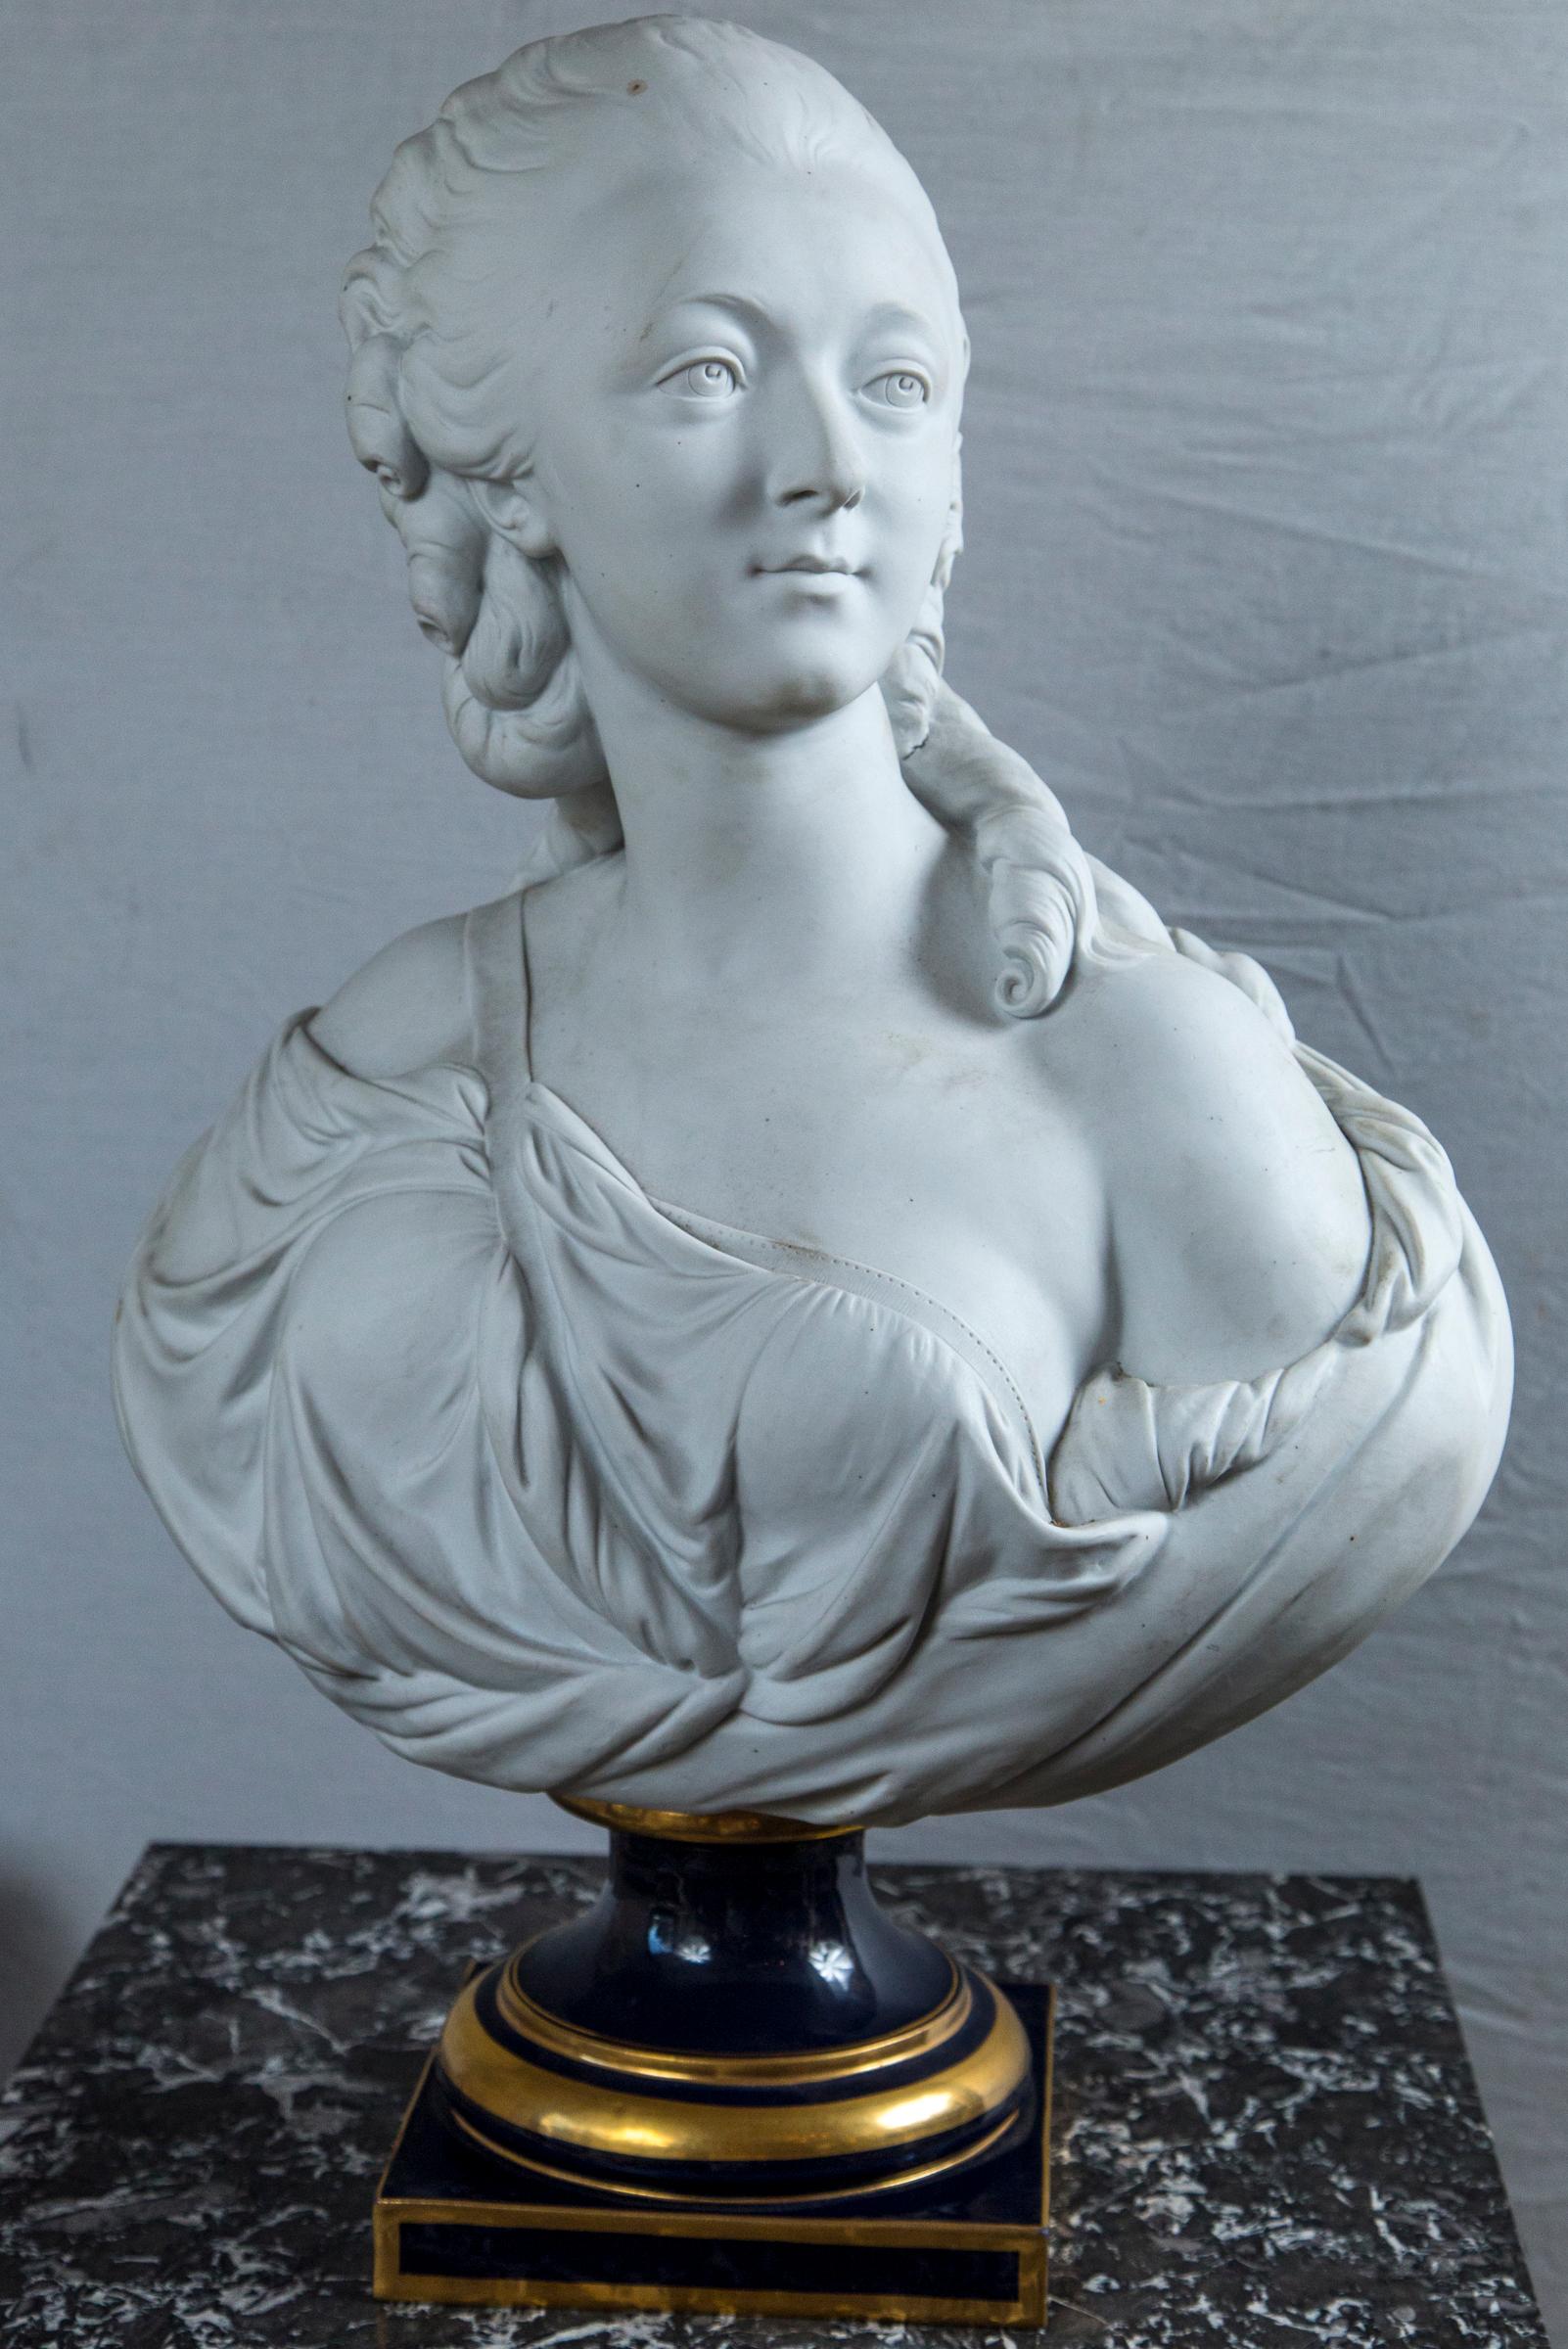 Beautifully modeled unglazed porcelain bust on a cobalt blue and gold porcelain socle
Impressed on the back is PORTRAIT DE MADAME LA COMTESSE DUBARY
There is a Sevres mark impressed on the bottom of the socle. It is unsigned by the artist.
The